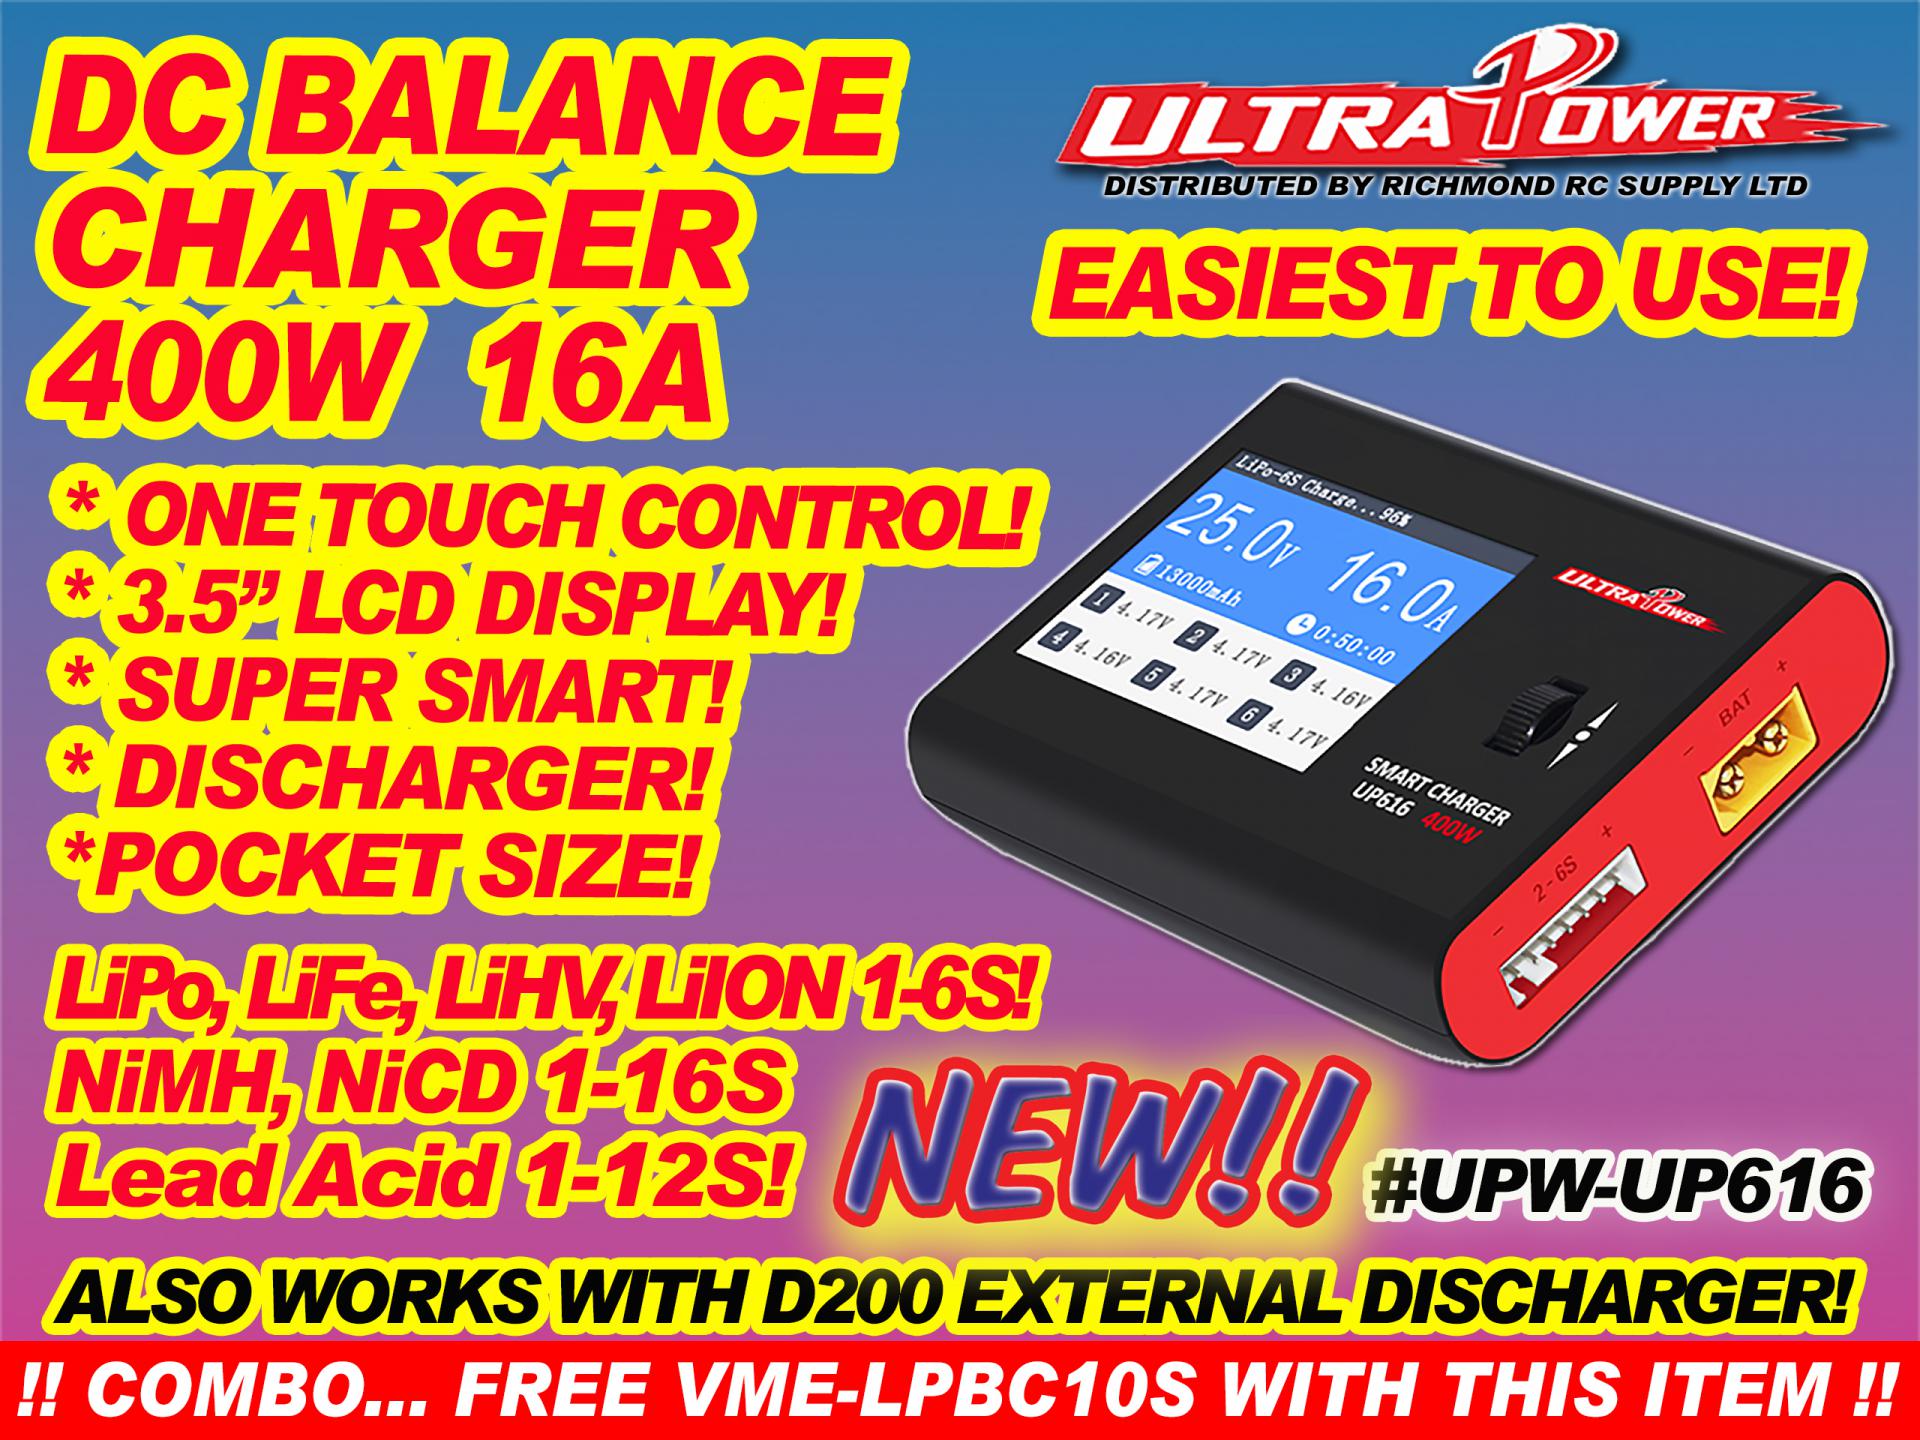 ULTRA POWER CHARGER - DC, 400W 16A w/TFT SCREEN x1  [ 71207]